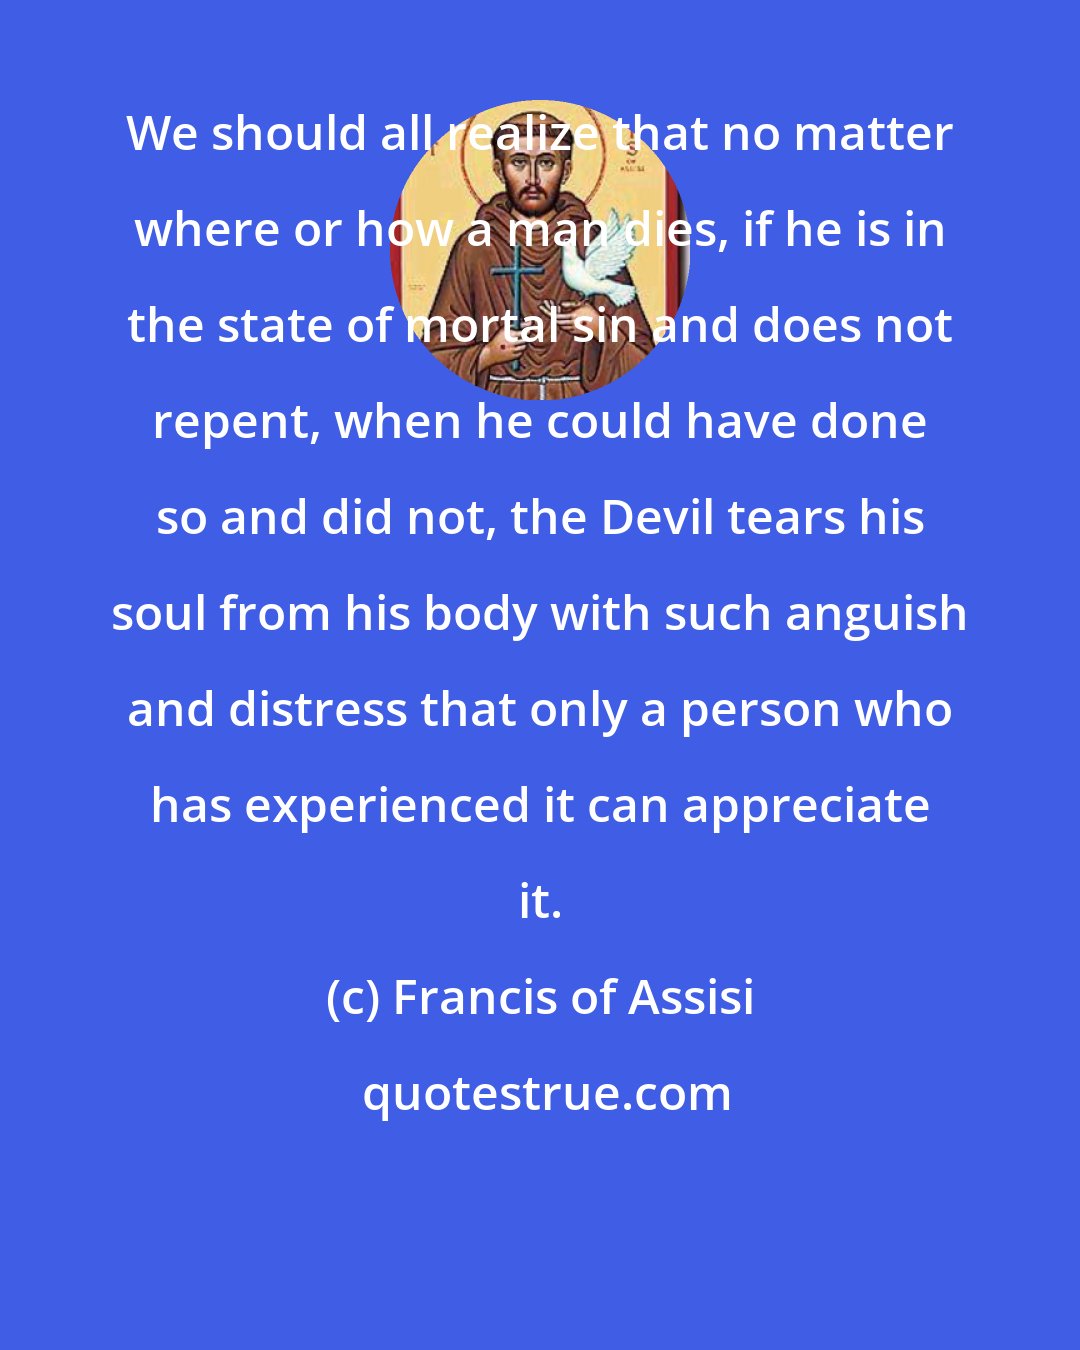 Francis of Assisi: We should all realize that no matter where or how a man dies, if he is in the state of mortal sin and does not repent, when he could have done so and did not, the Devil tears his soul from his body with such anguish and distress that only a person who has experienced it can appreciate it.